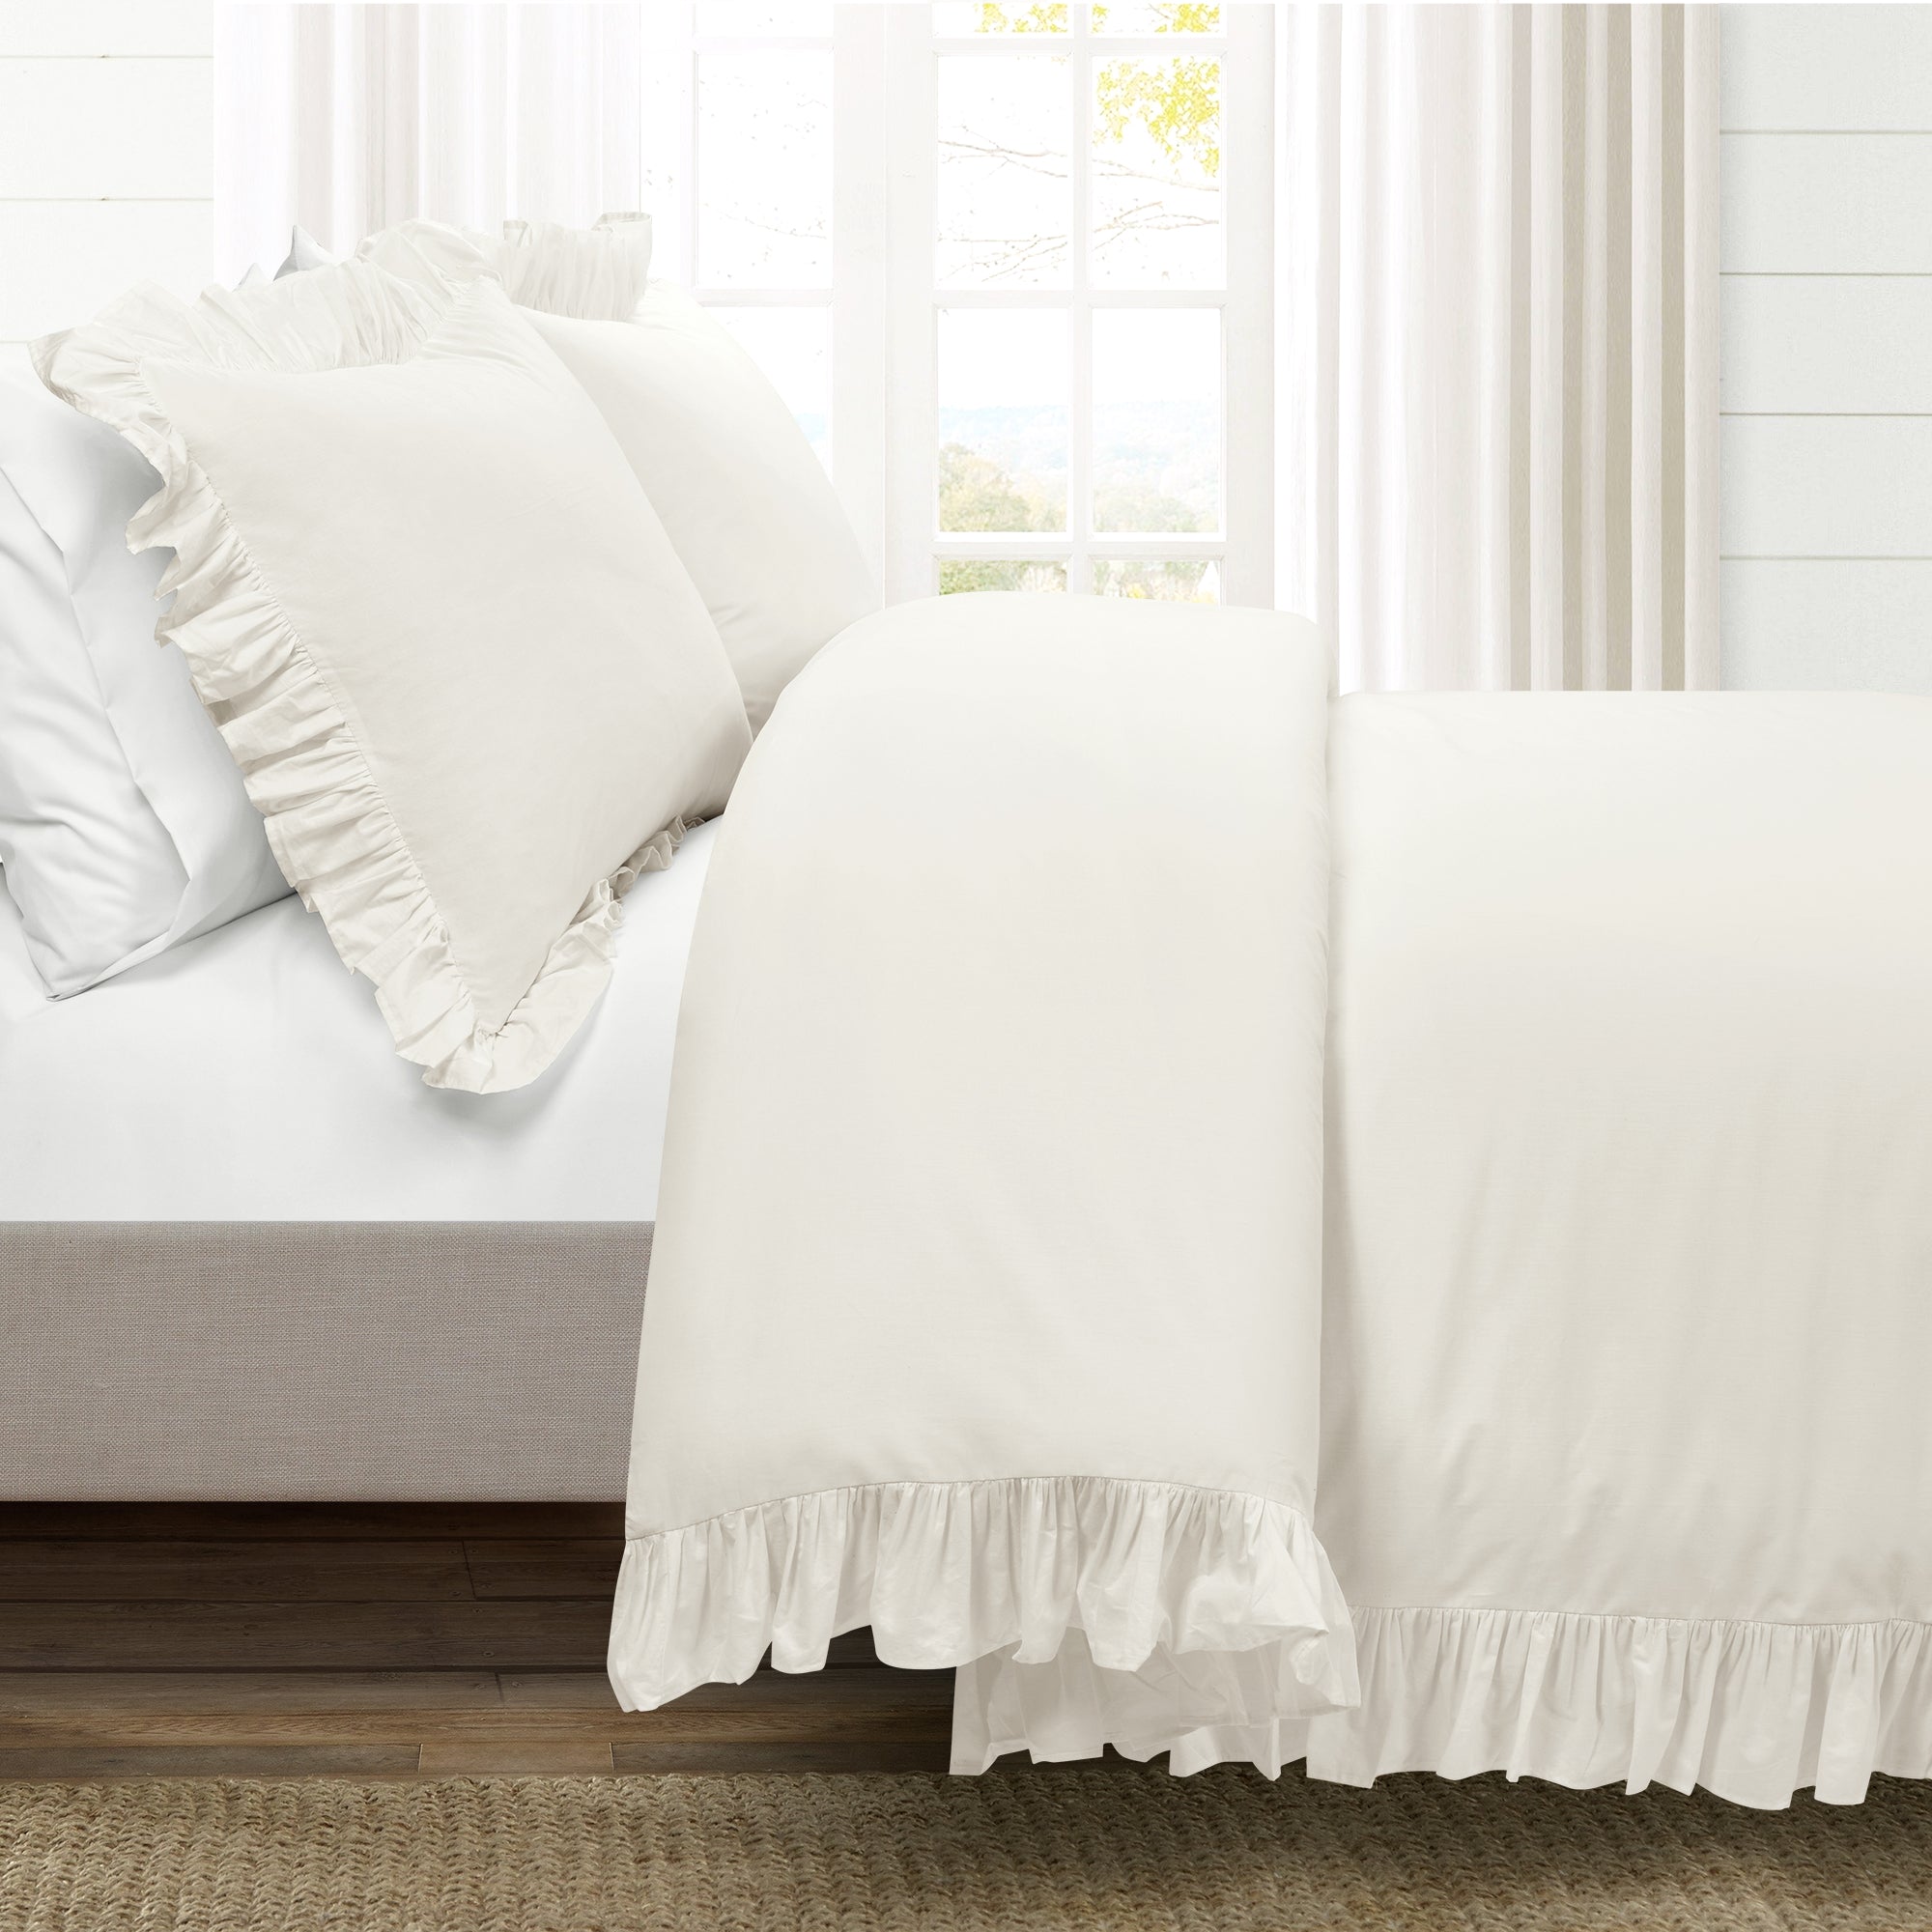 Reyna Cotton Duvet Cover White 3Pc Set King – Rustic Tuesday